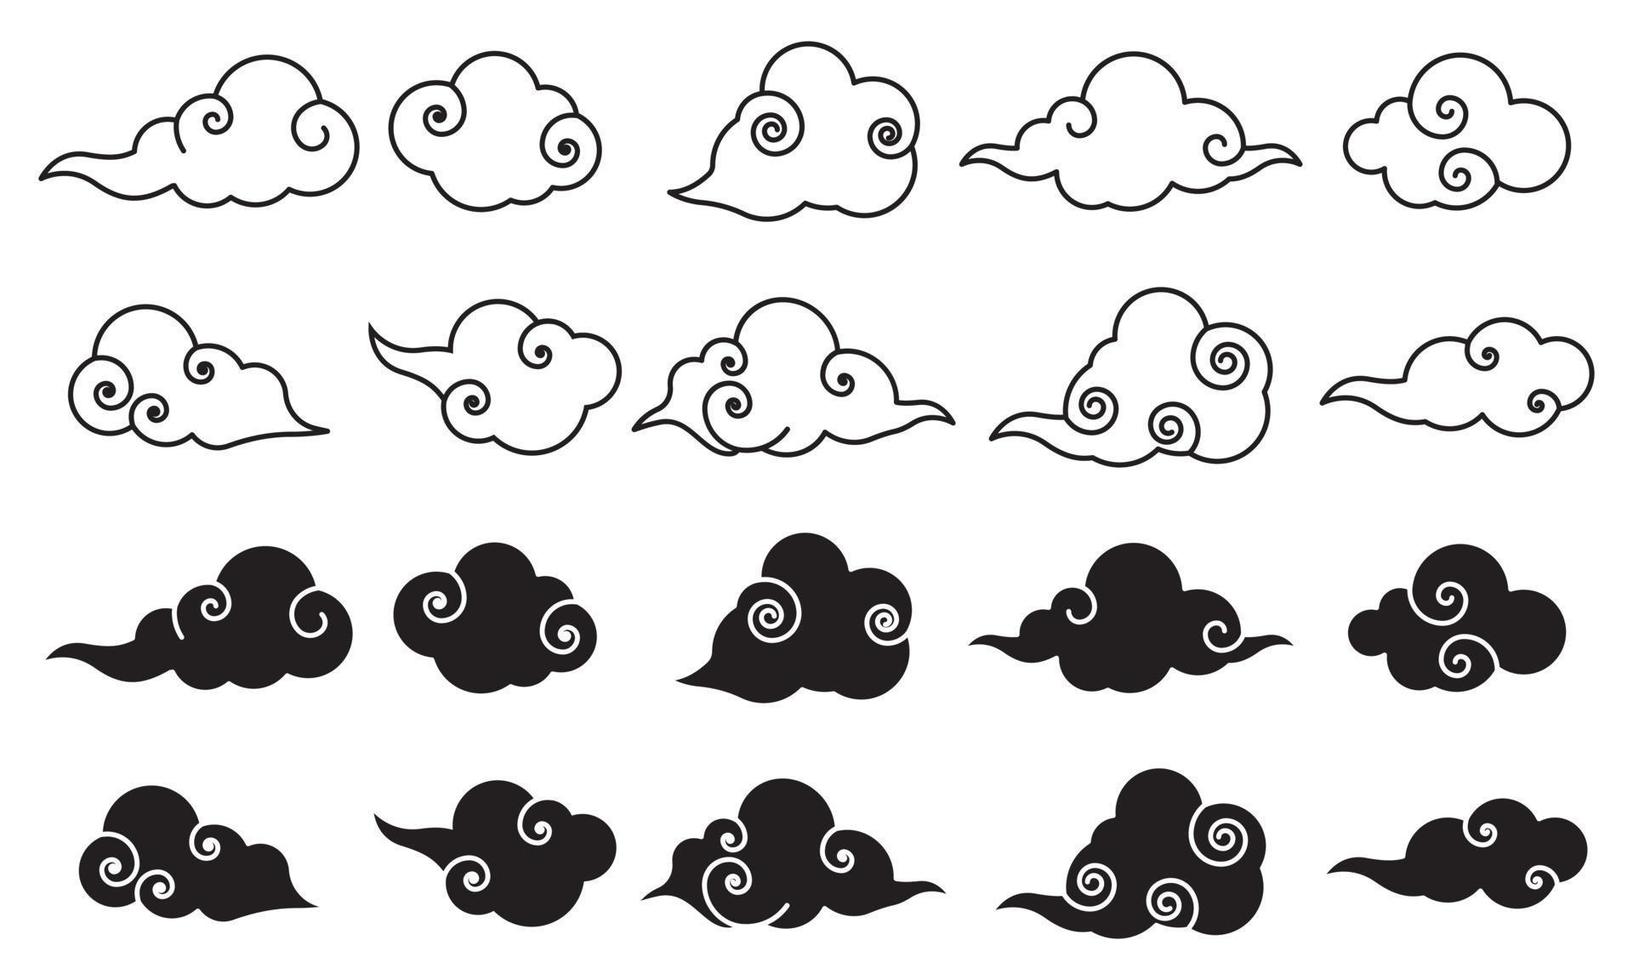 Set of chinese cloud icons vector illustration